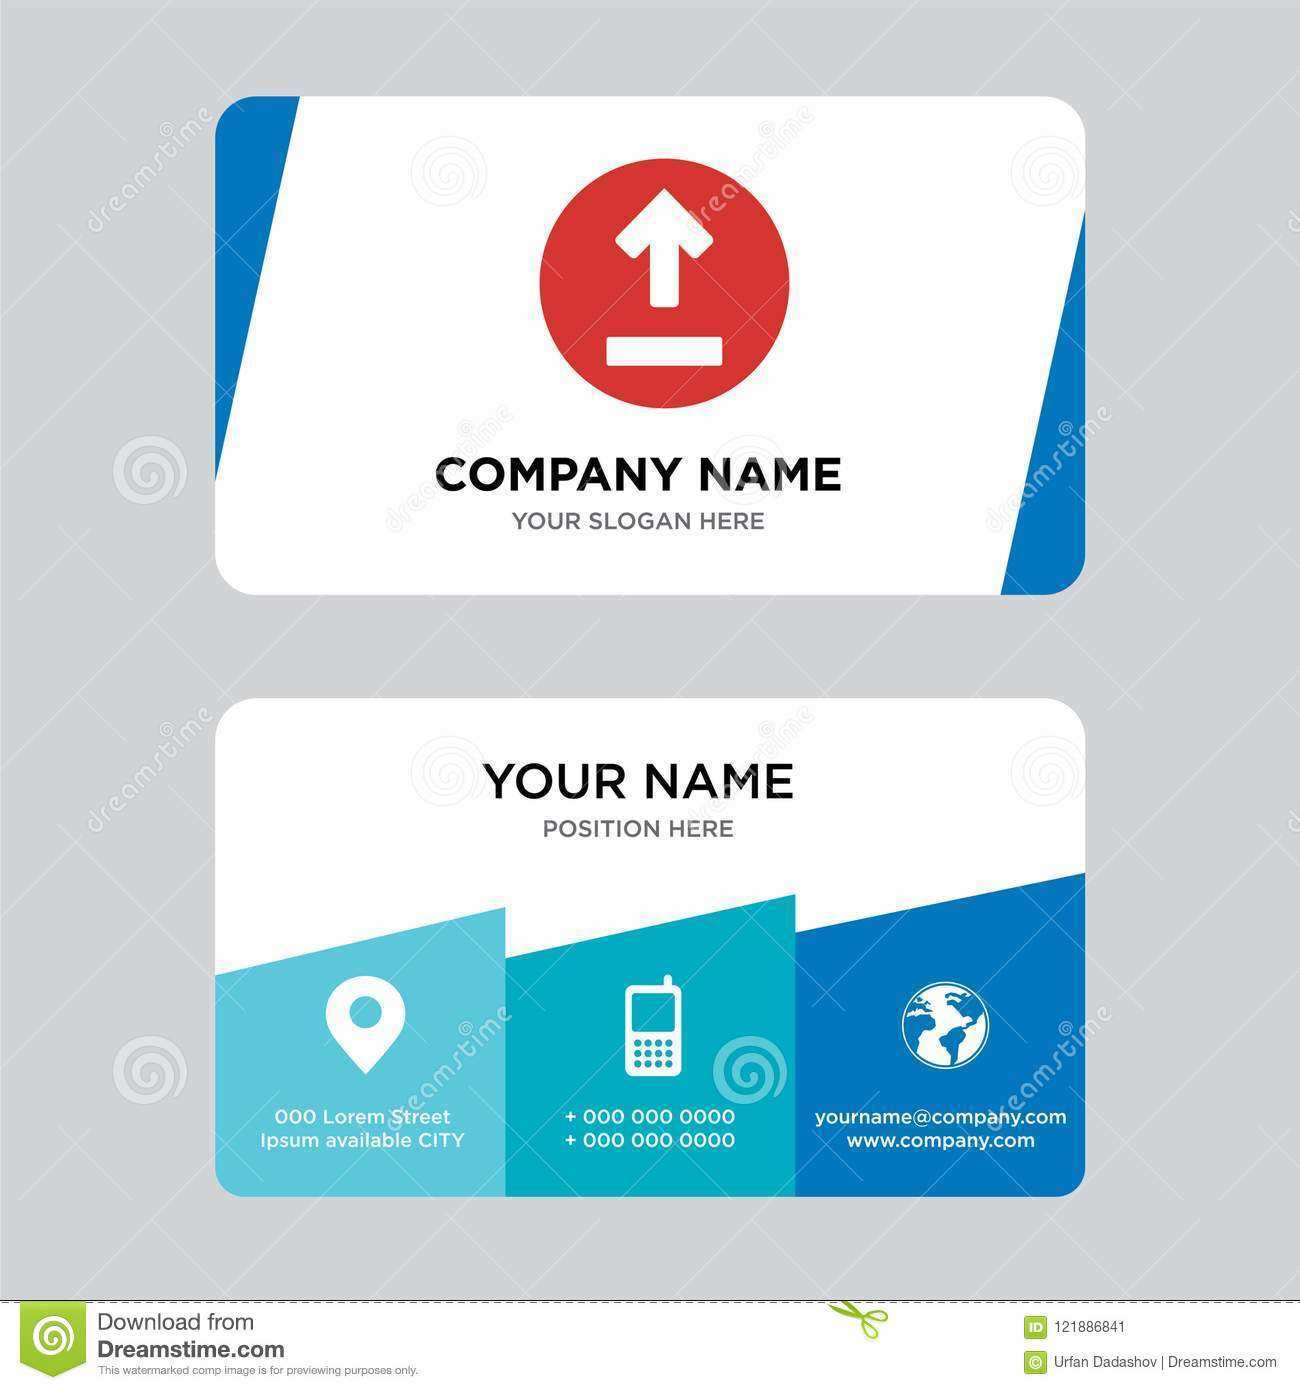 43 Visiting Business Card Upload Template in Word by Business Card Upload Template